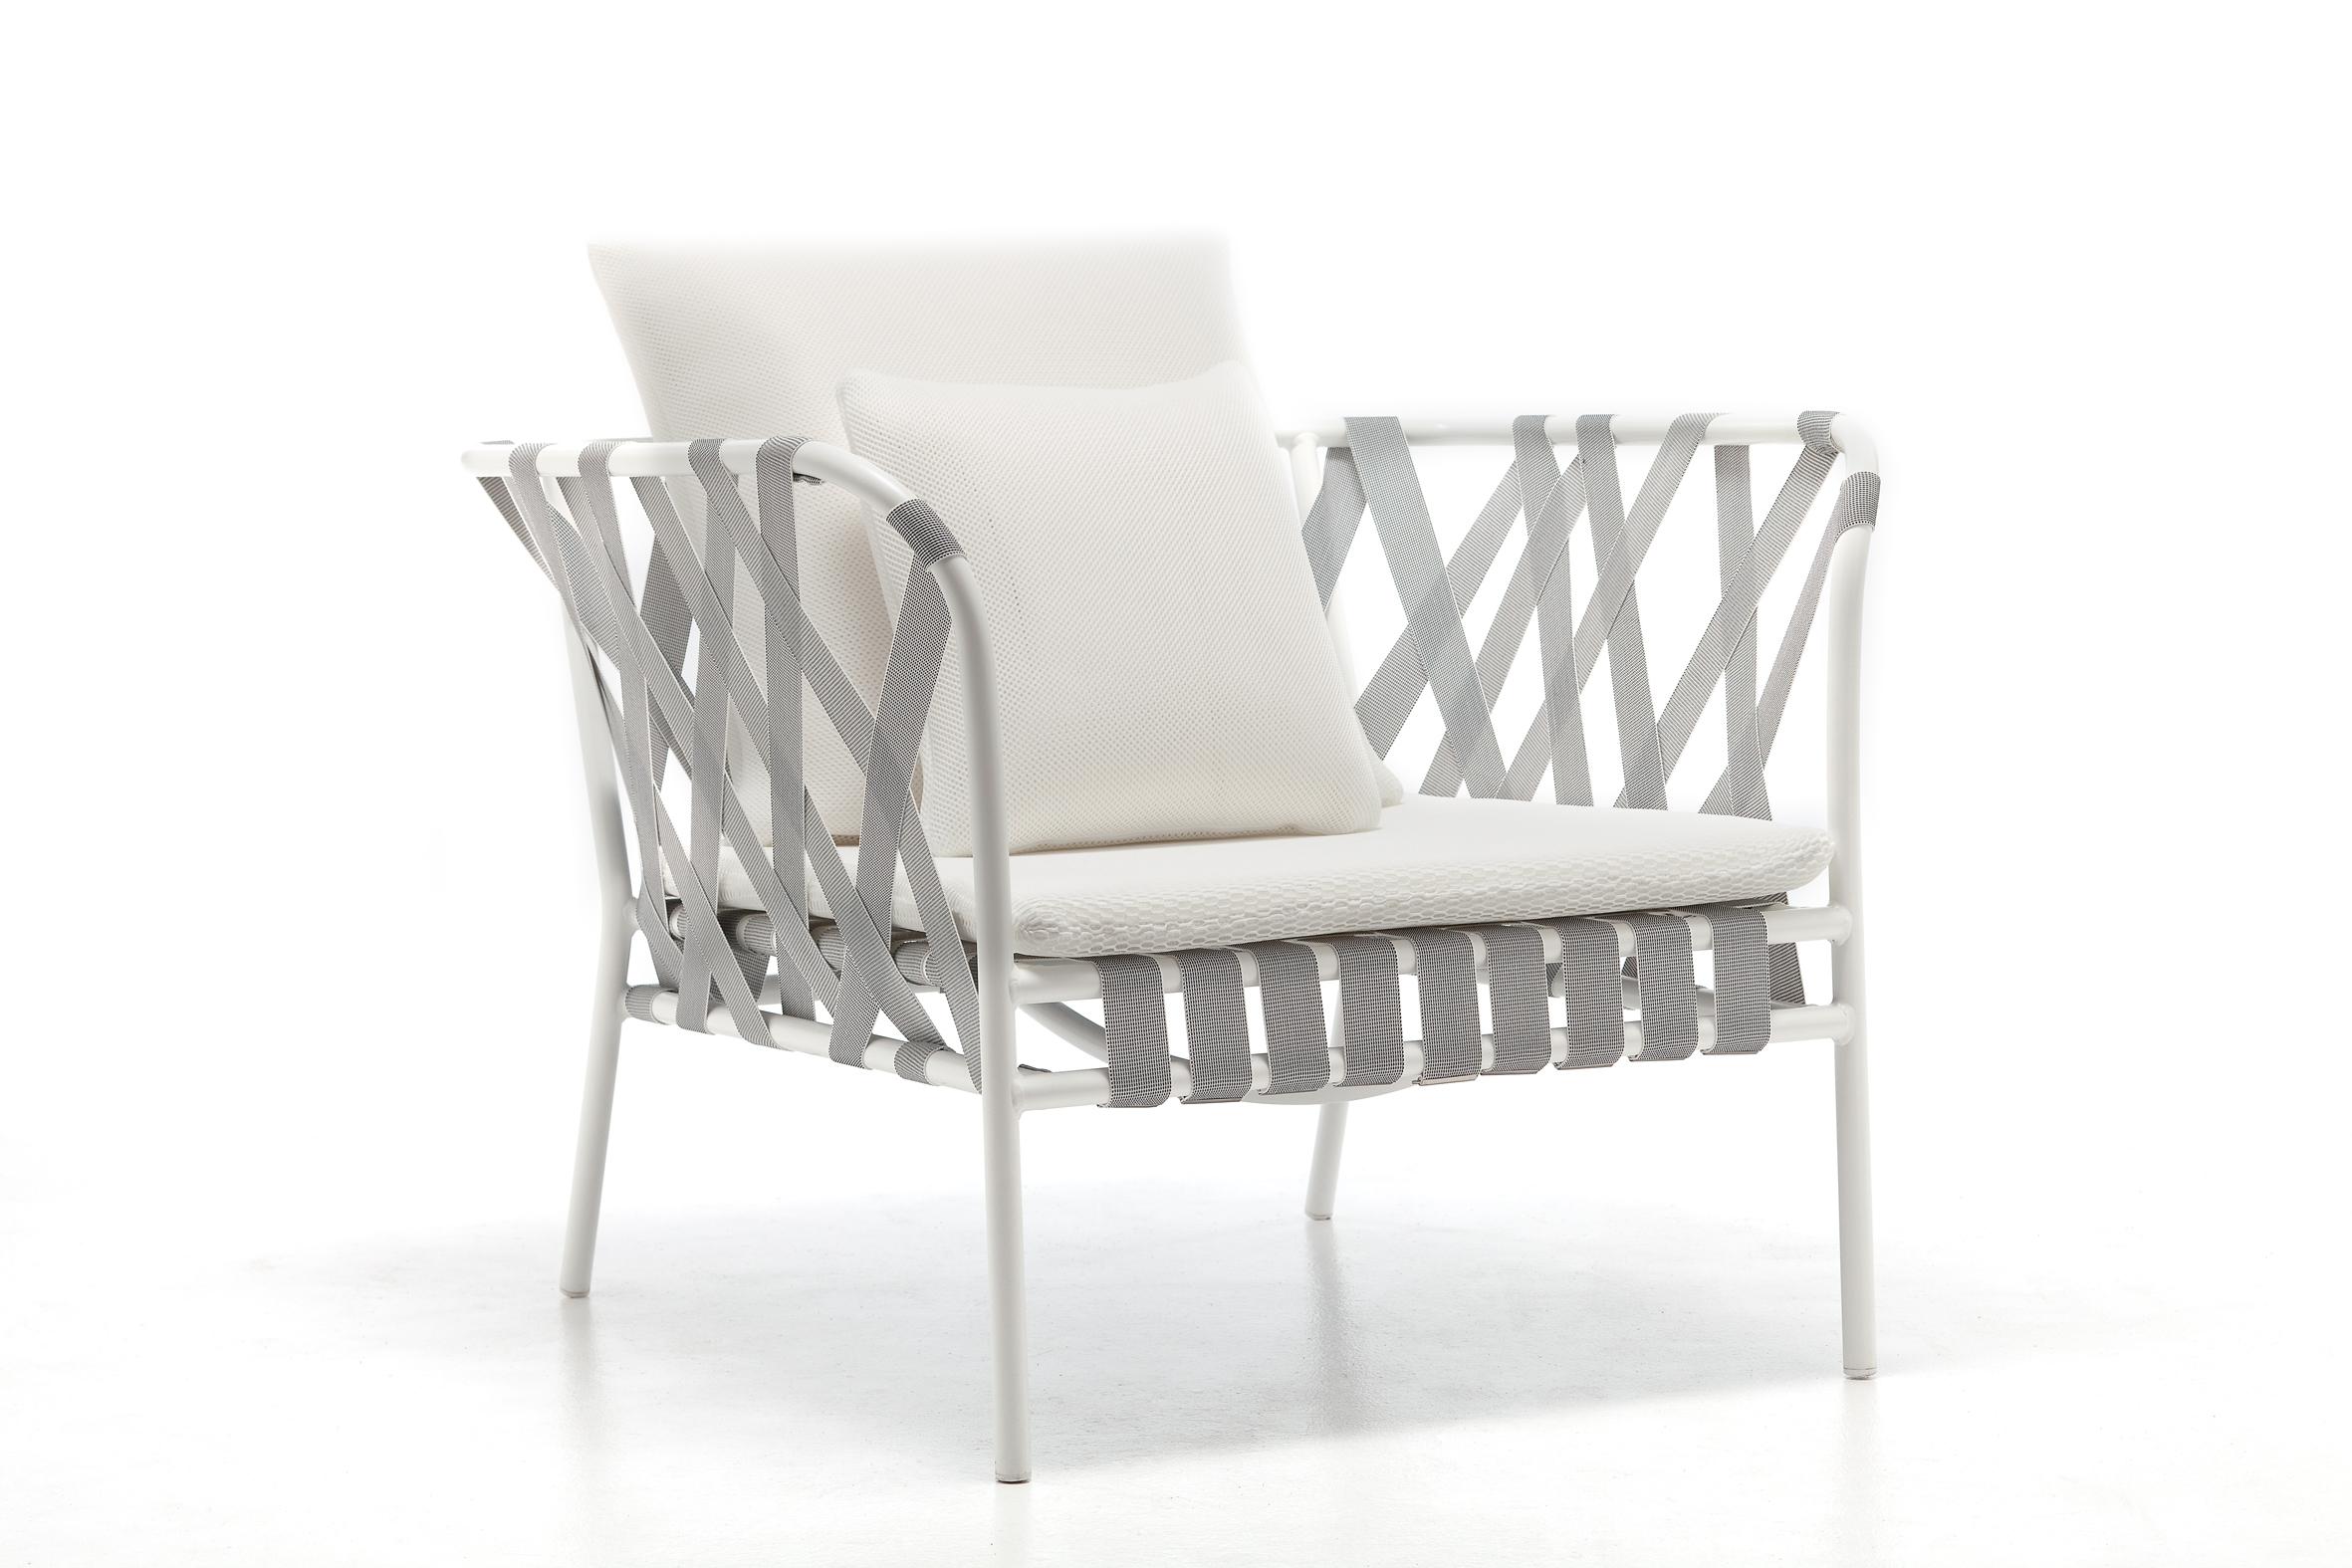 The Inout 851 armchair develops around a light structure in white, grey or sage painted tubular aluminium, an ecological material, unique for its technical qualities. To this is added a particular weave in grey, black or blue elastic strap, an